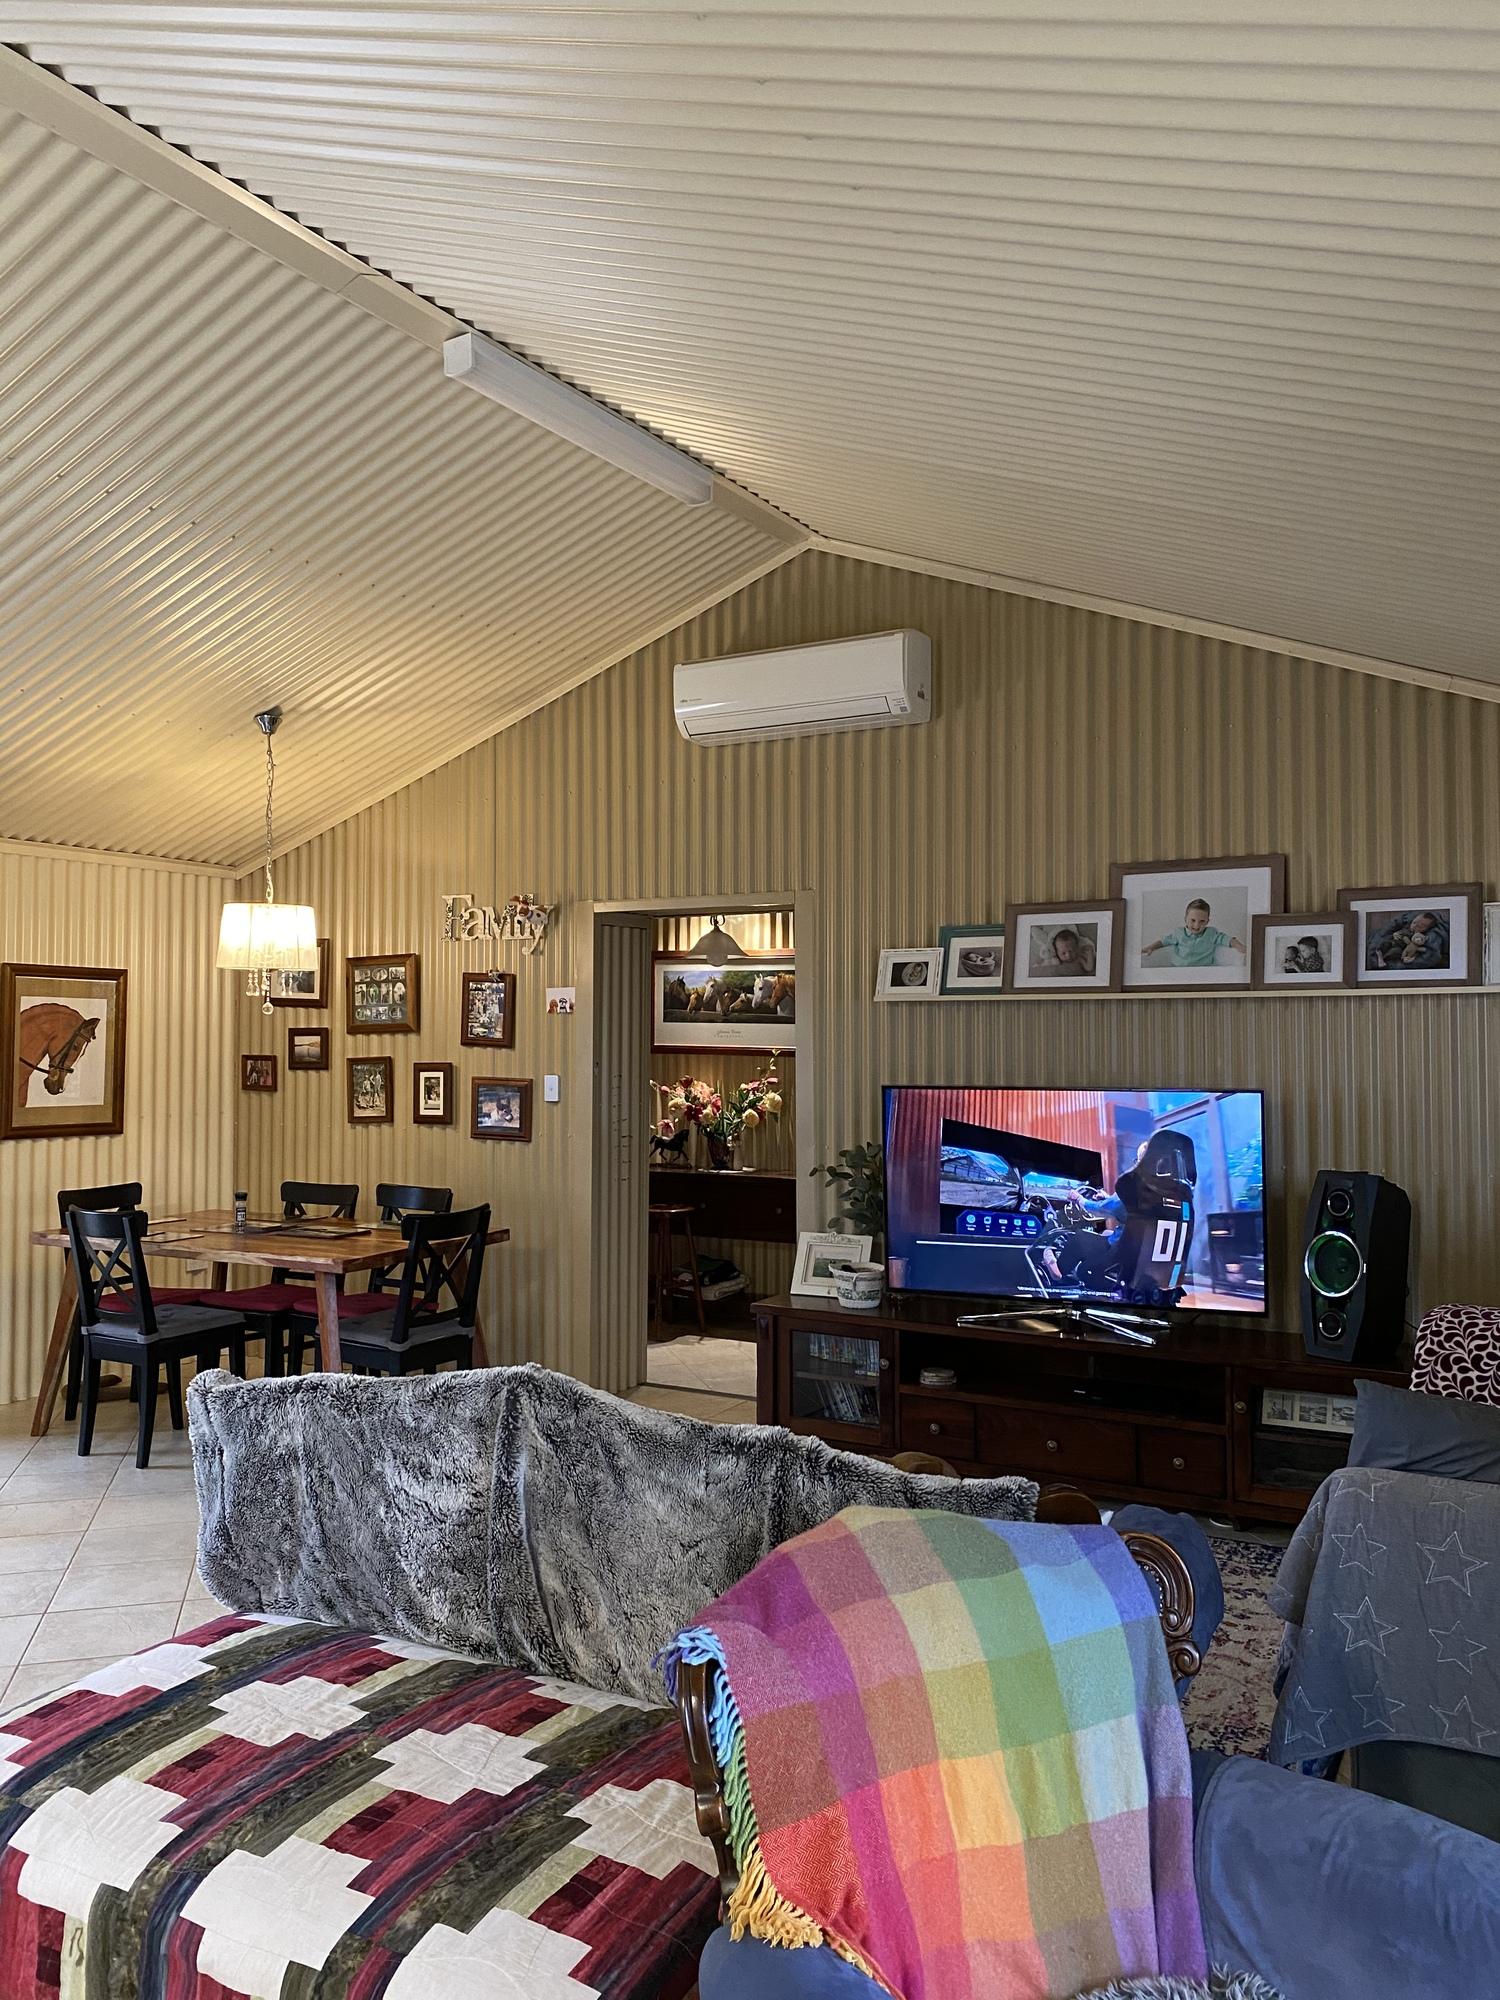 Nicole from Mannum, SA loves COLORBOND® steel. Roofing, Guttering & Fascia, Garage Doors, Walling, Fencing, Sheds made from COLORBOND® steel in colours Classic Cream™ and Paperbark®